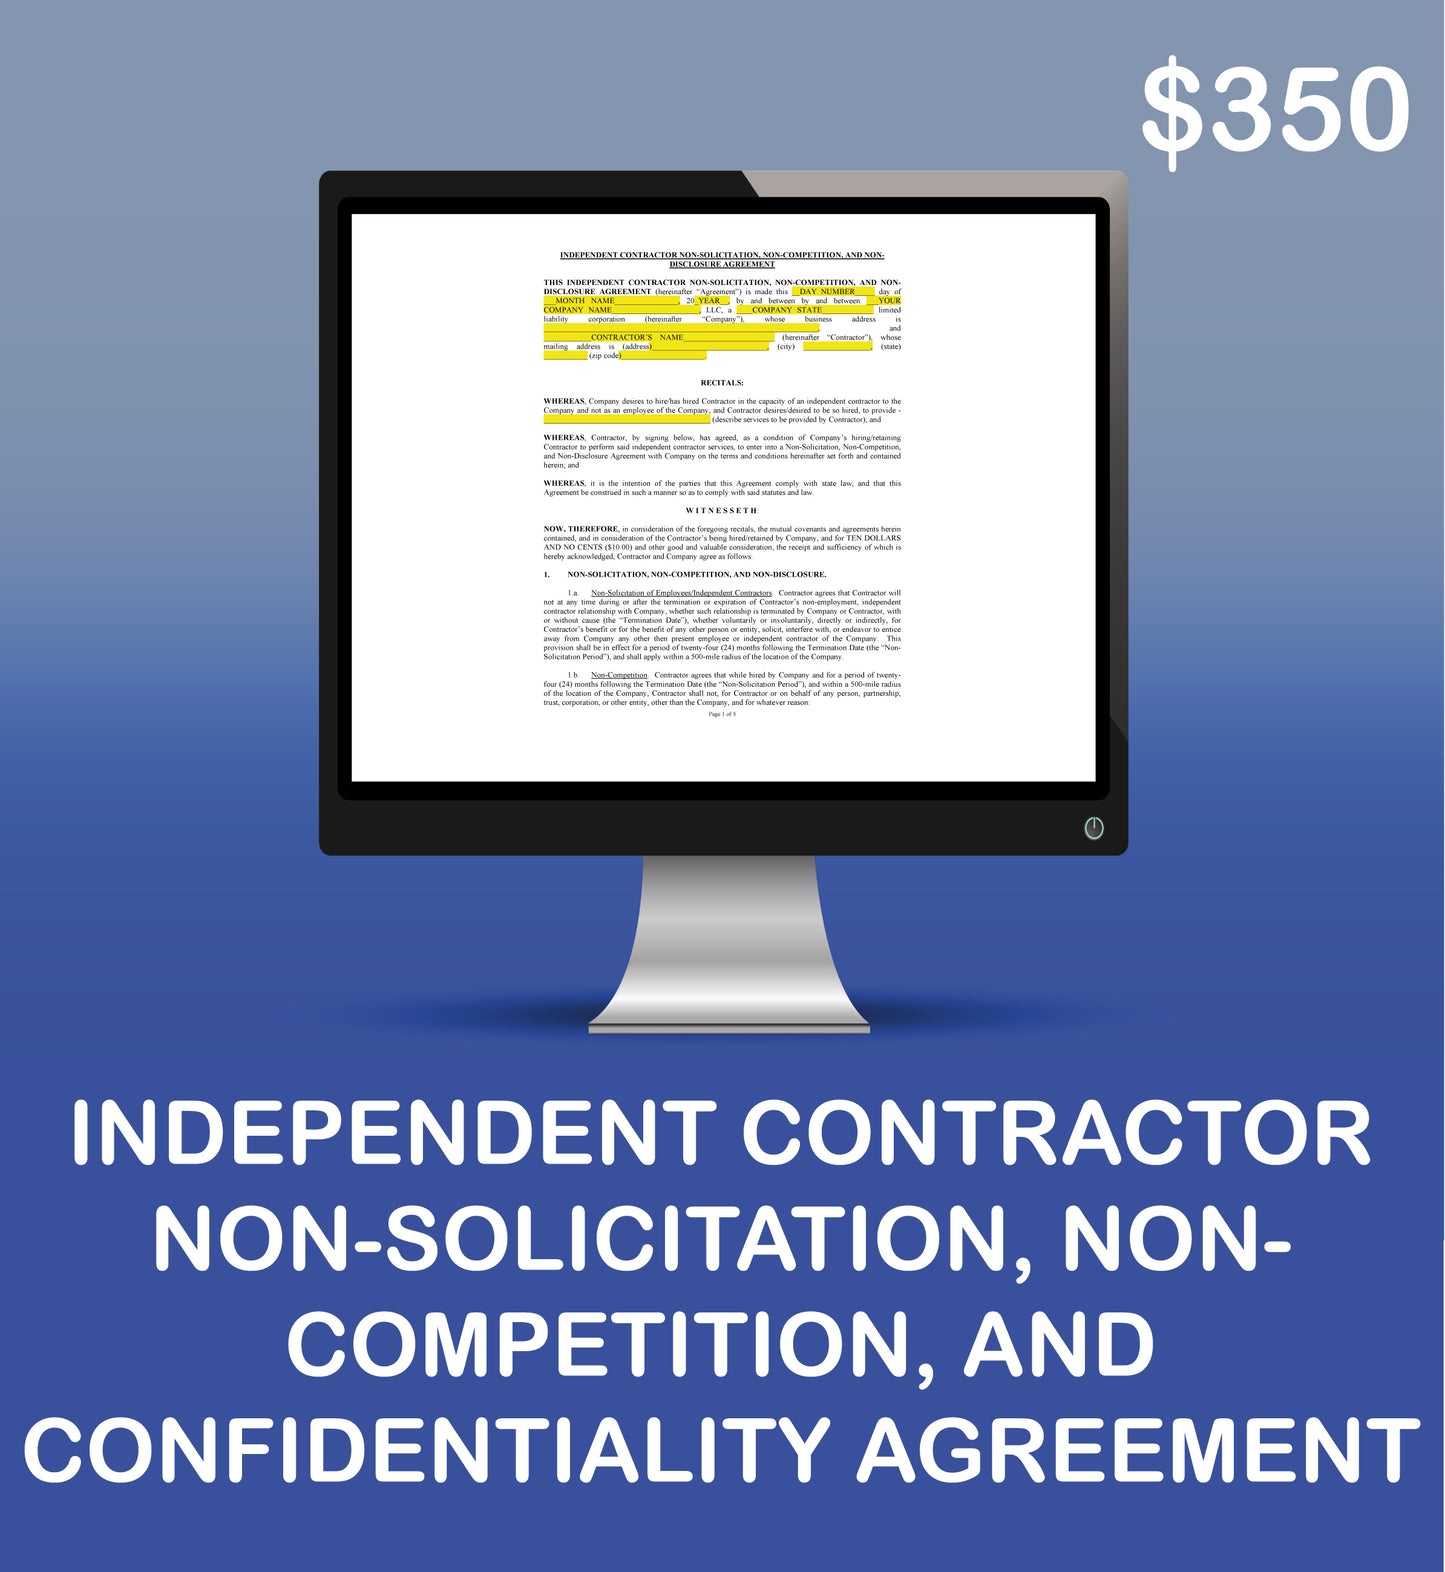 Independent Contractor Non-Solicitation, Non-Competition, and Confidentiality Agreement